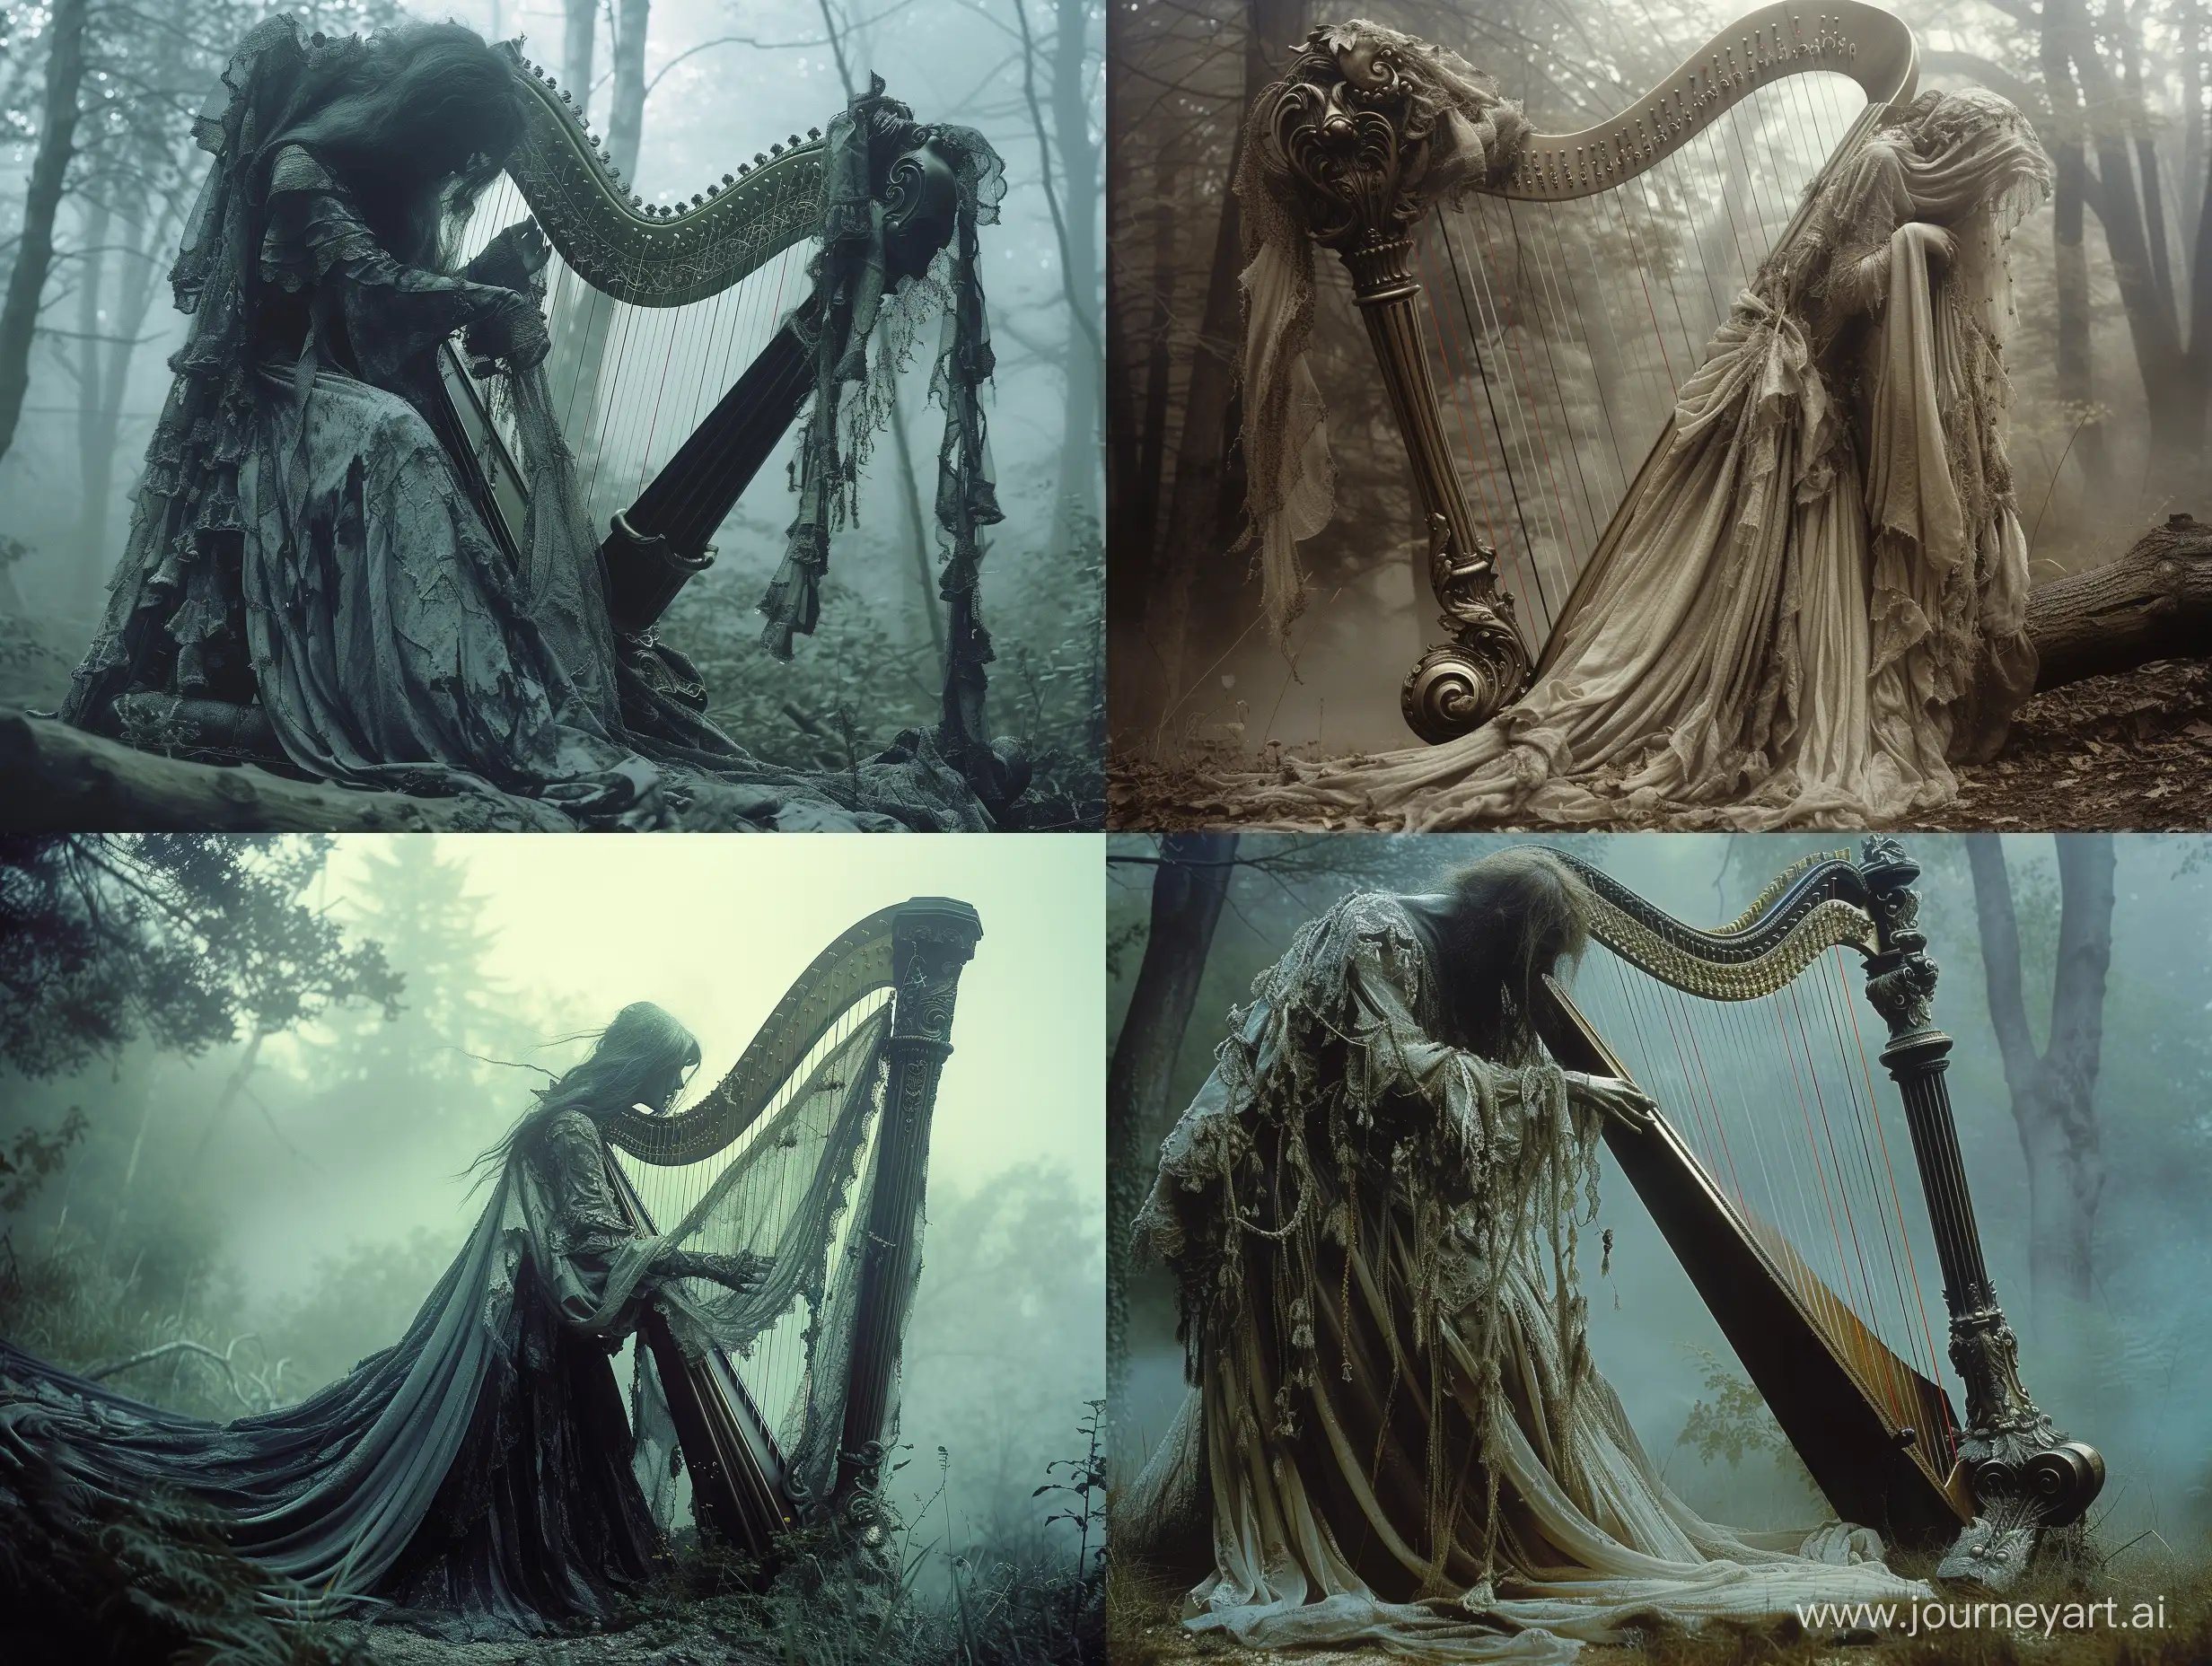 Ghostly-Harpist-in-Misty-Forest-Spectral-Woman-Playing-Ornate-Harp